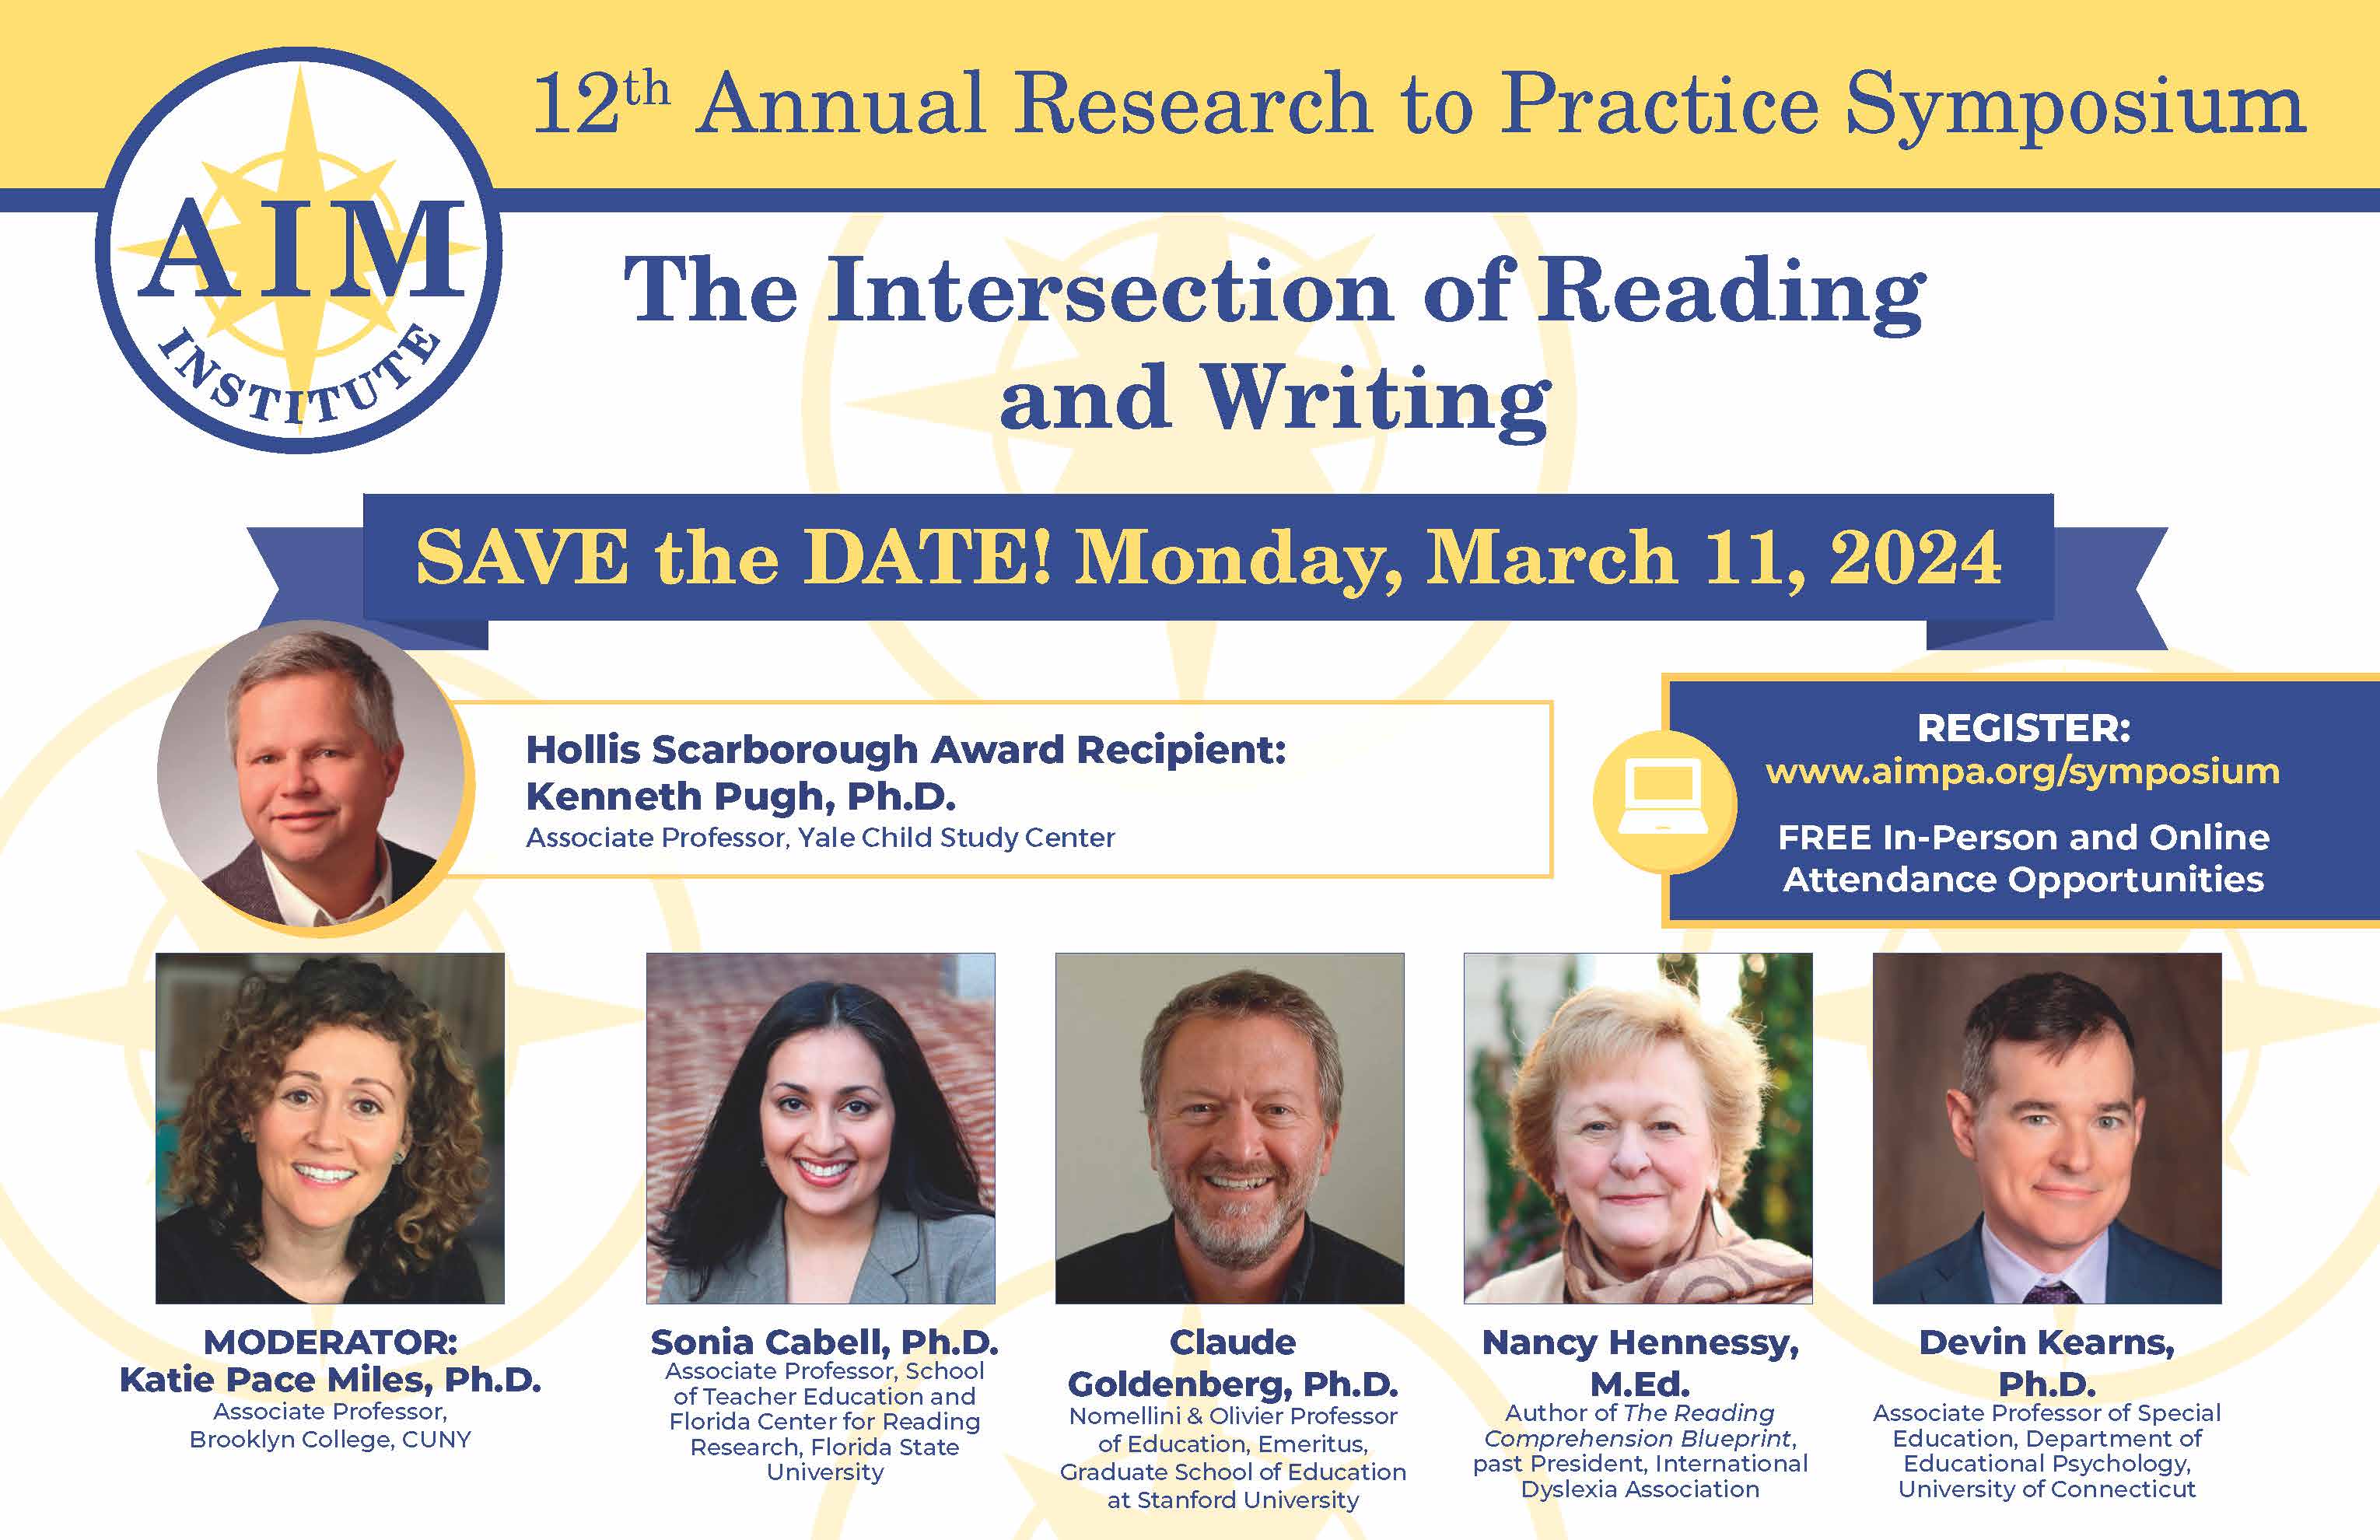 The Intersection of Reading and Writing – Research to Practice Symposium